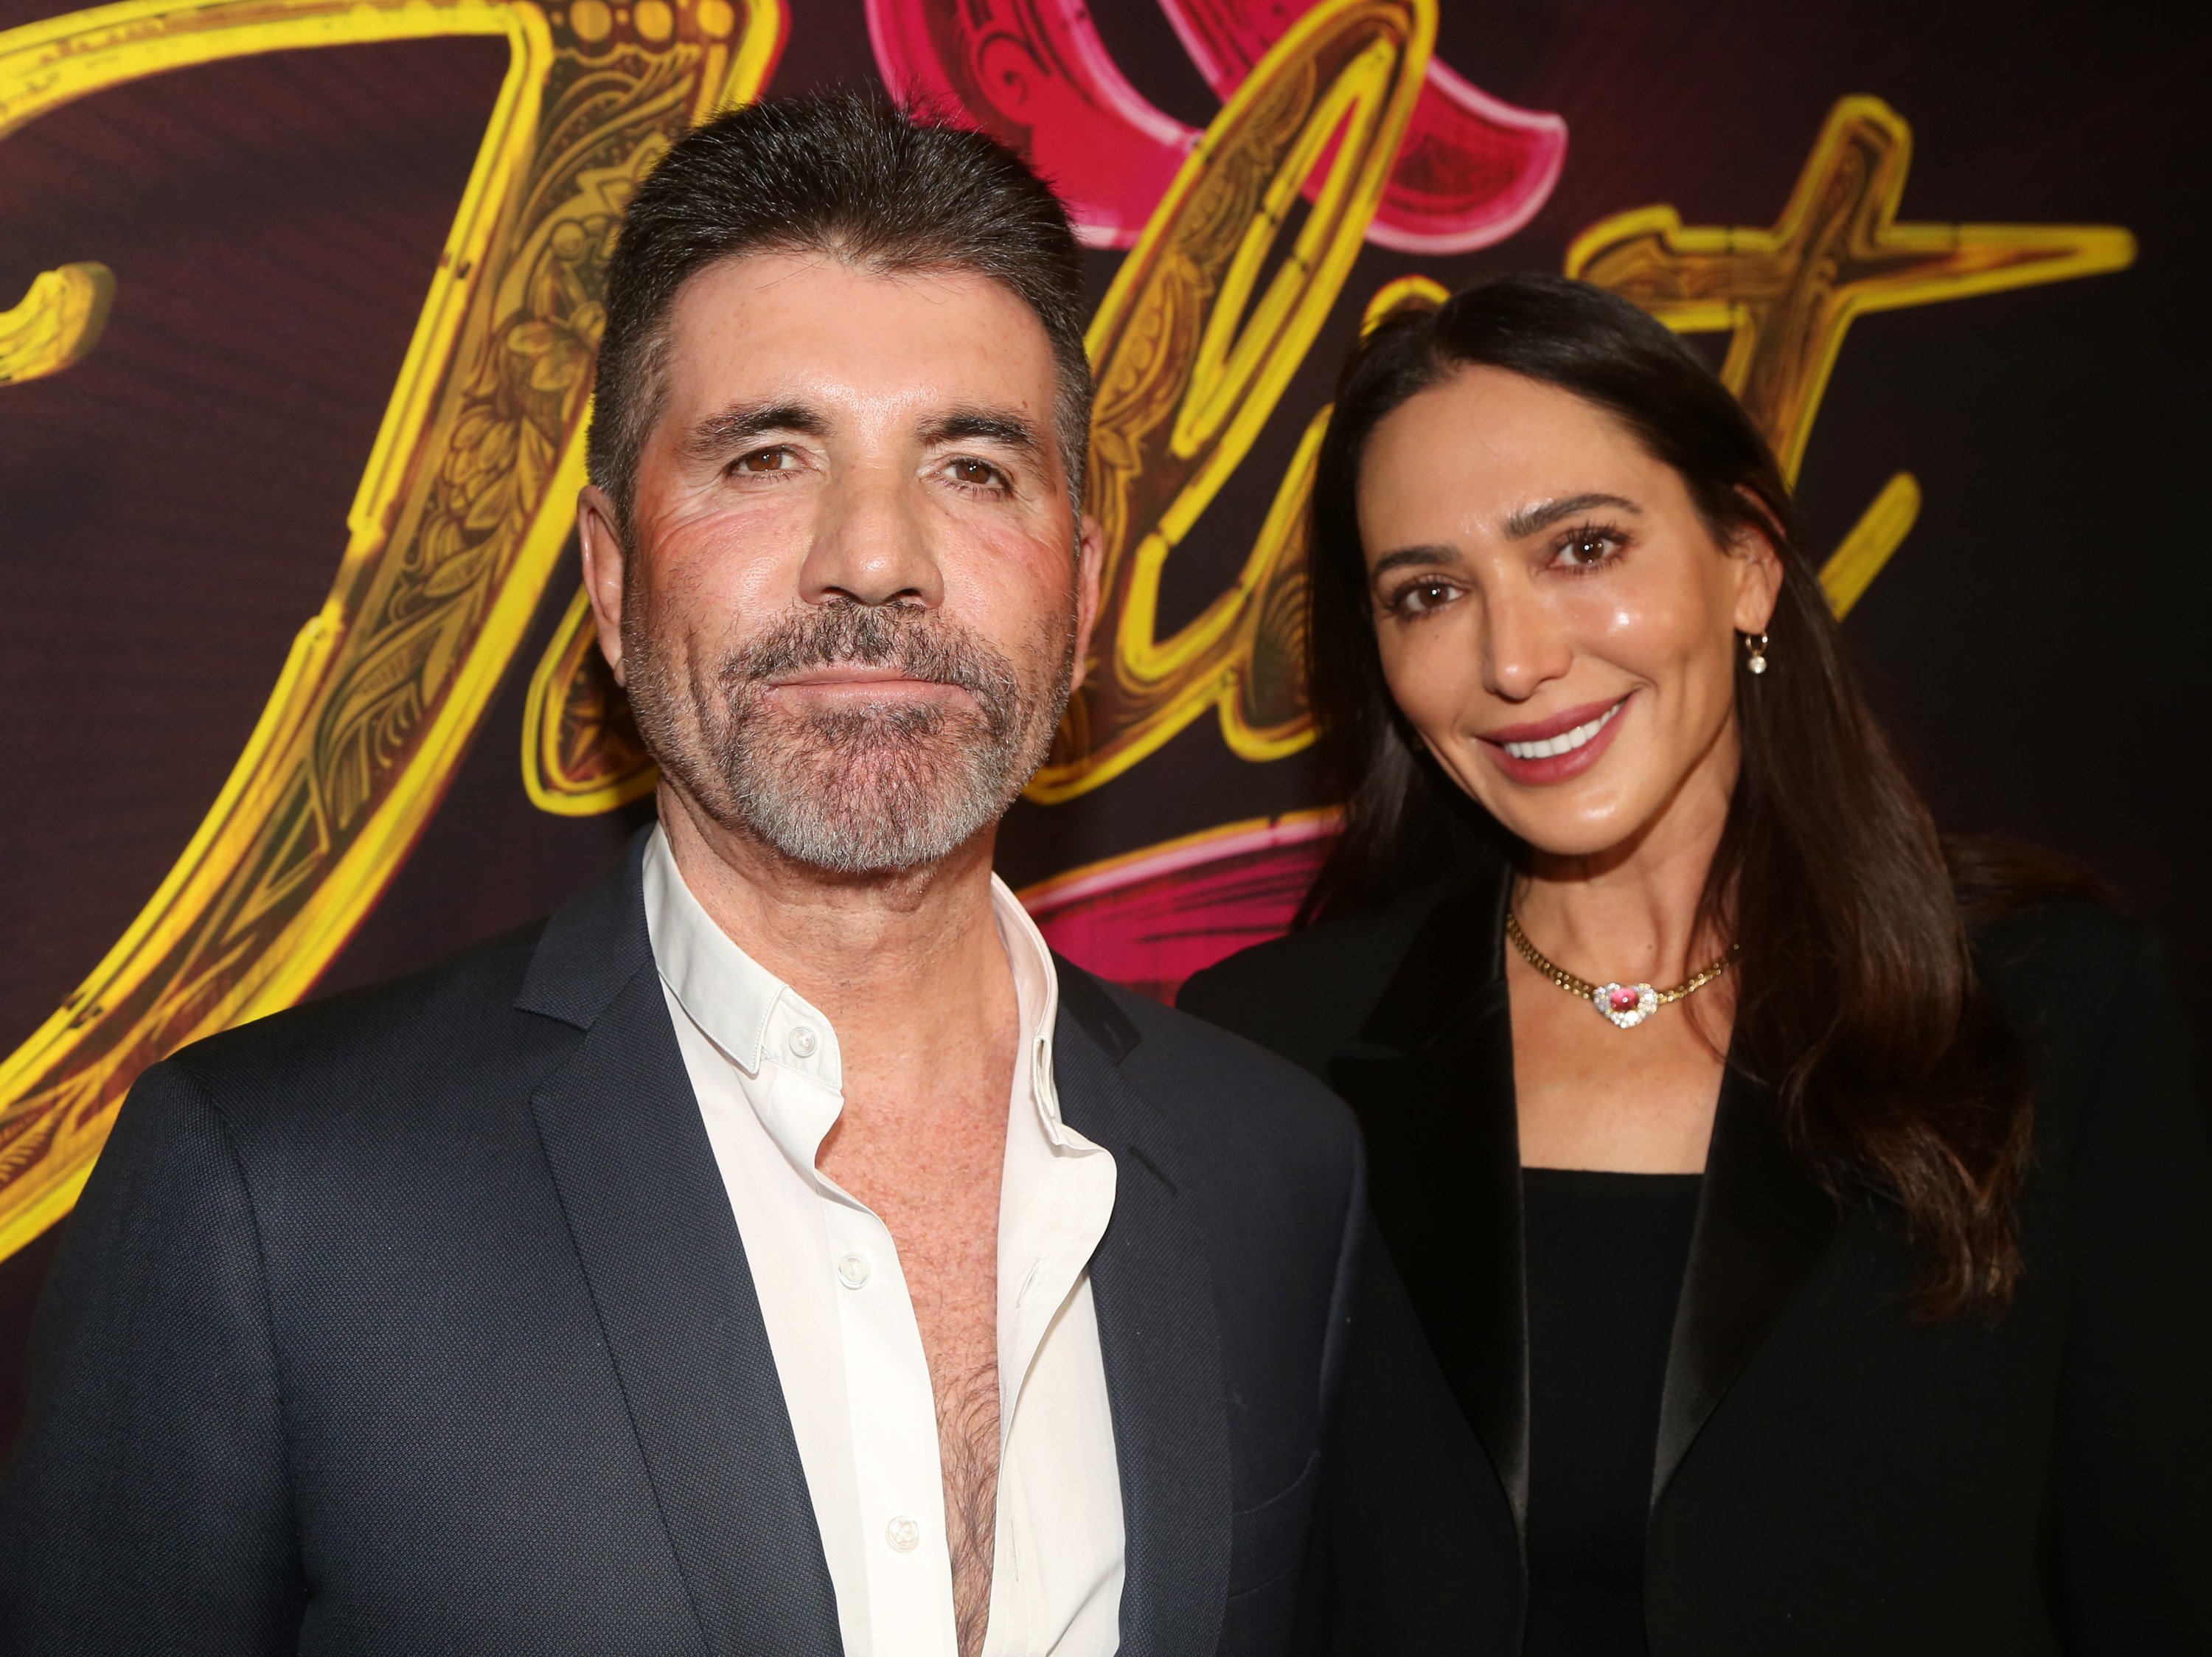 Simon Cowell and Lauren Silverman on November 17, 2022 in New York City. | Source: Getty Images